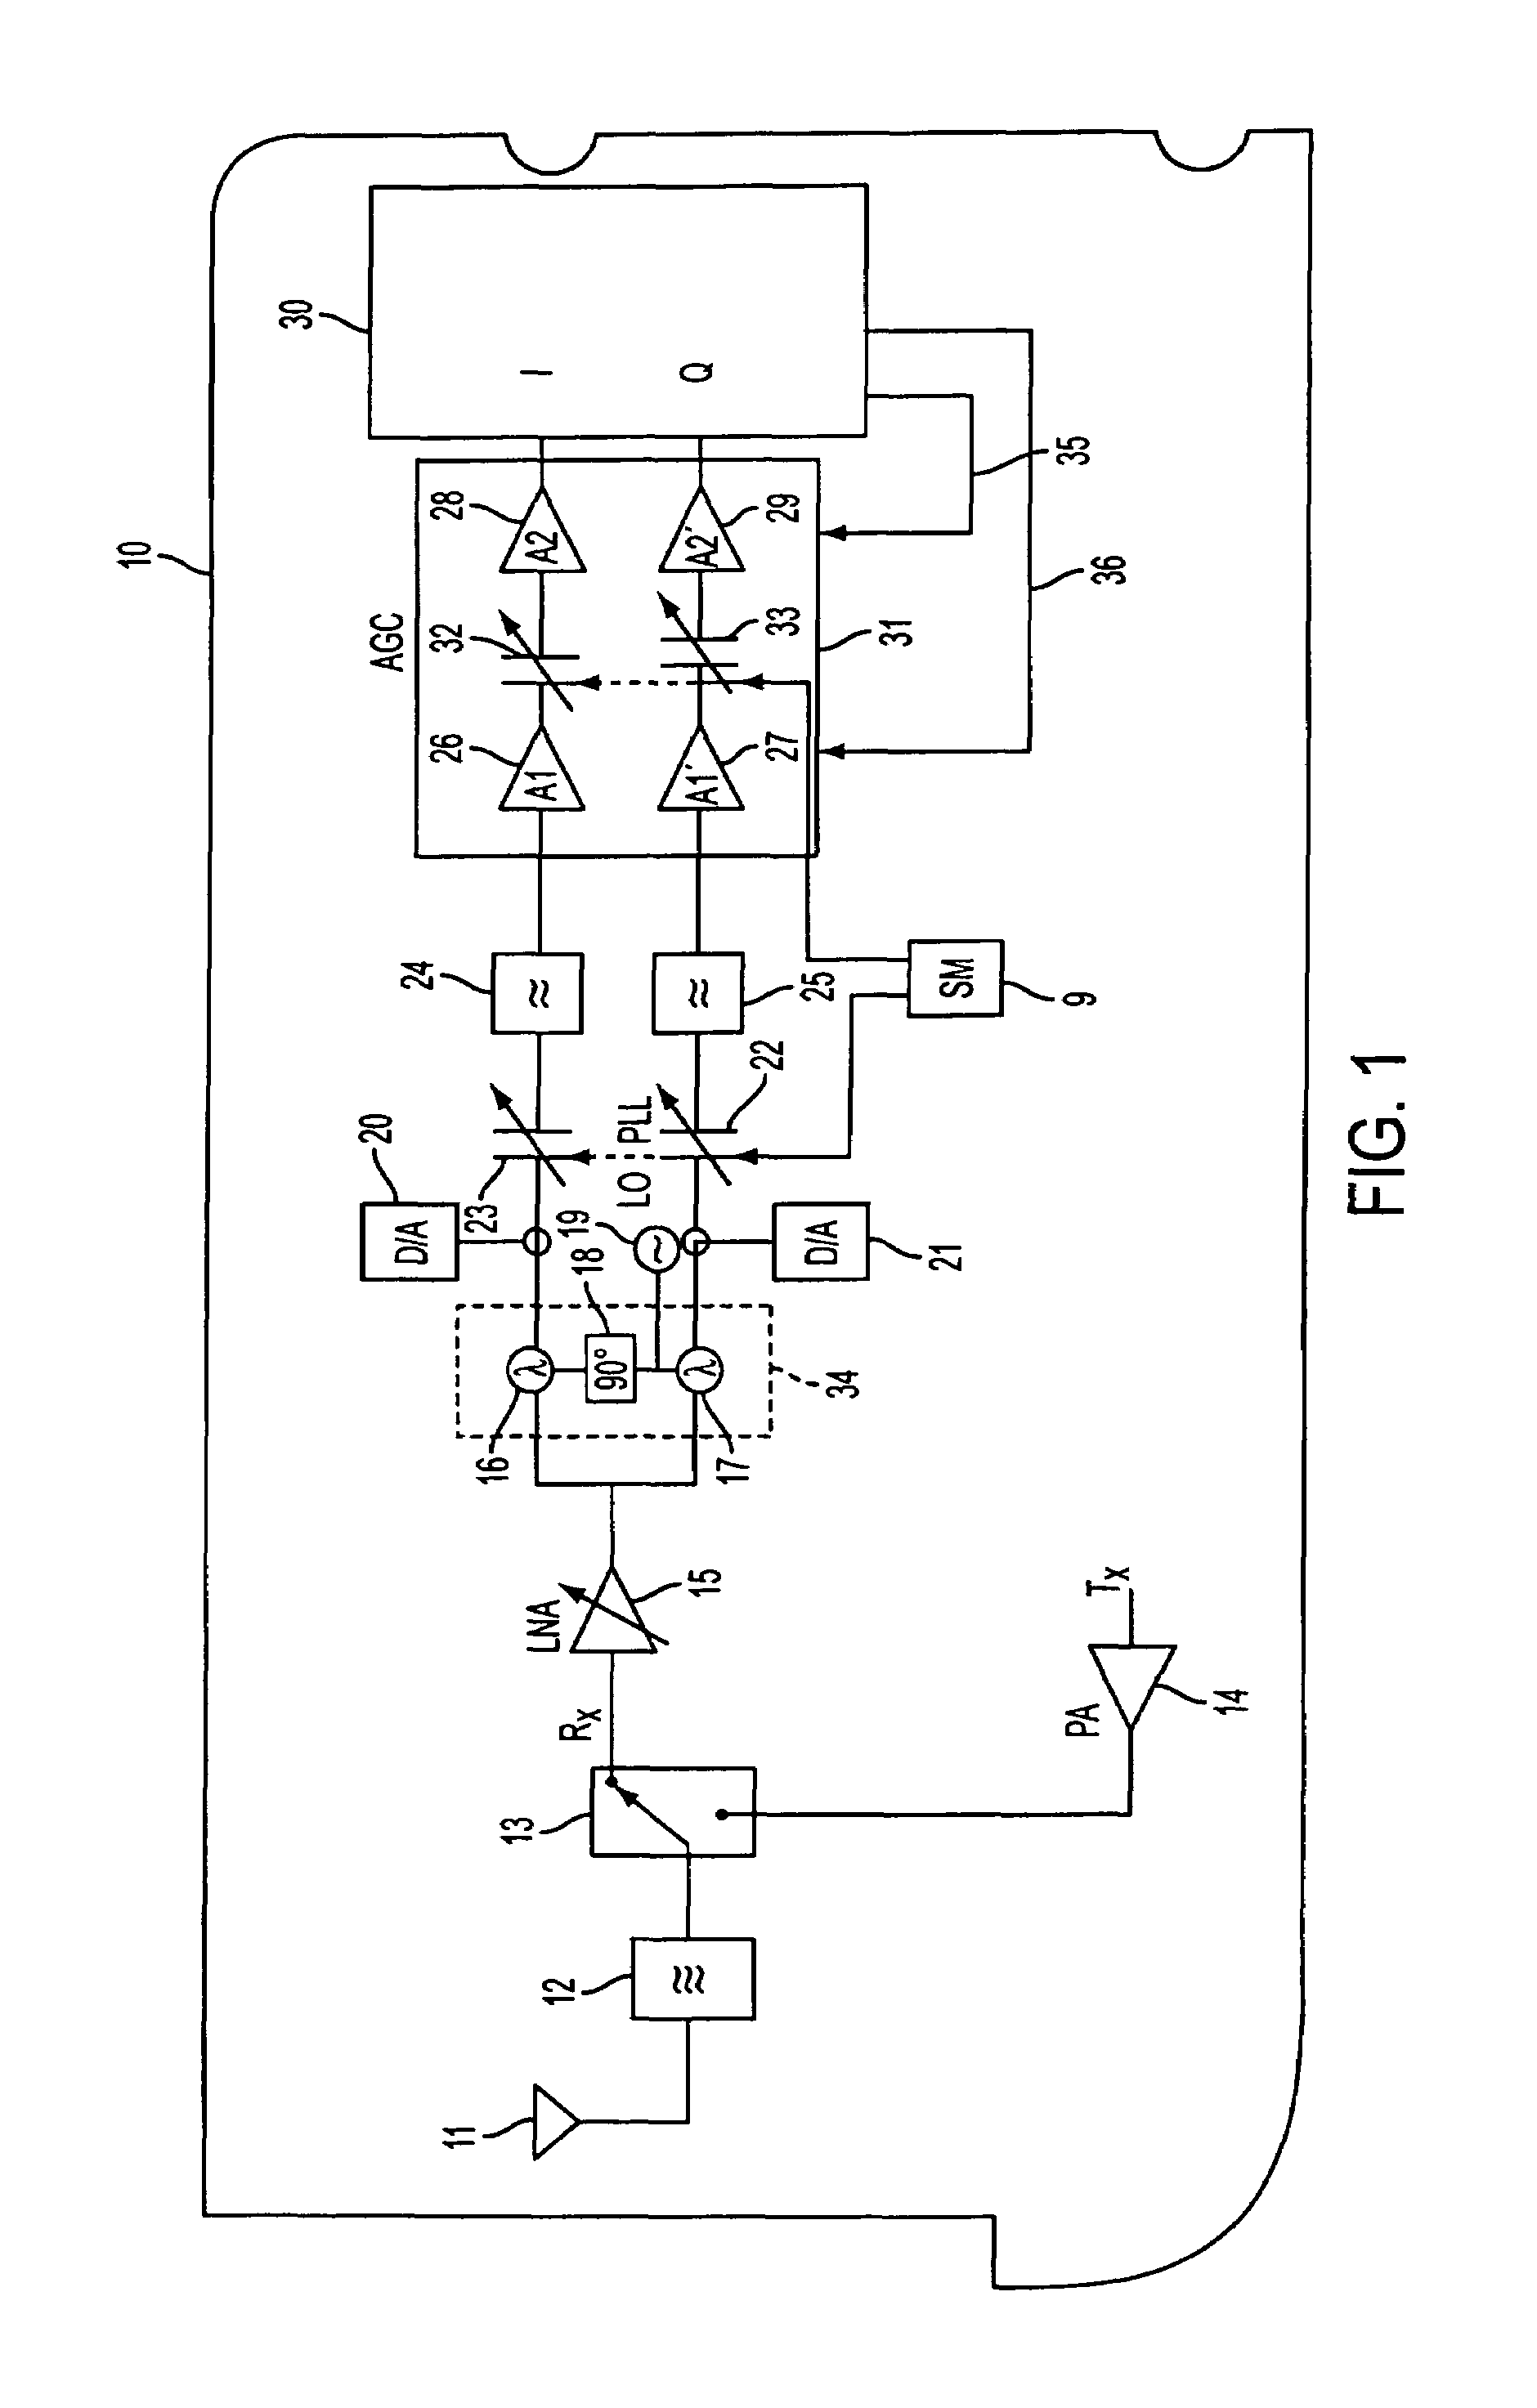 DC offset cancellation in a zero if receiver